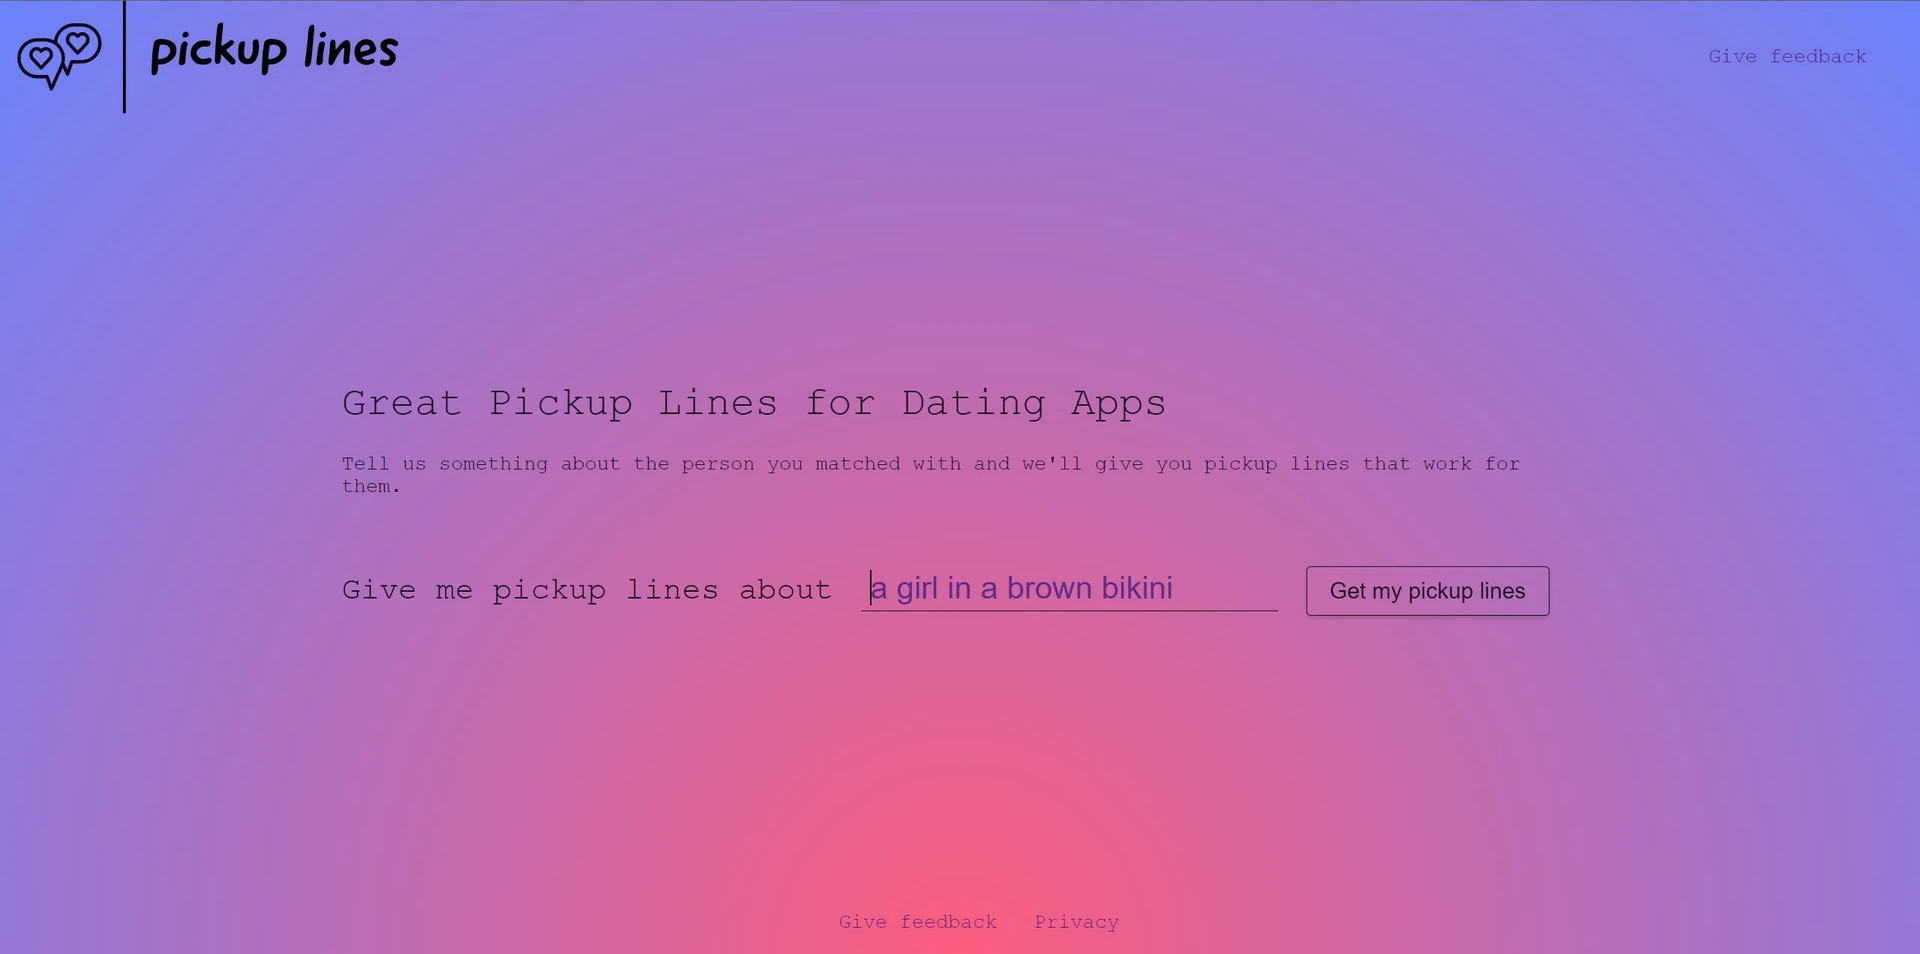 Pickup lineswebsite picture